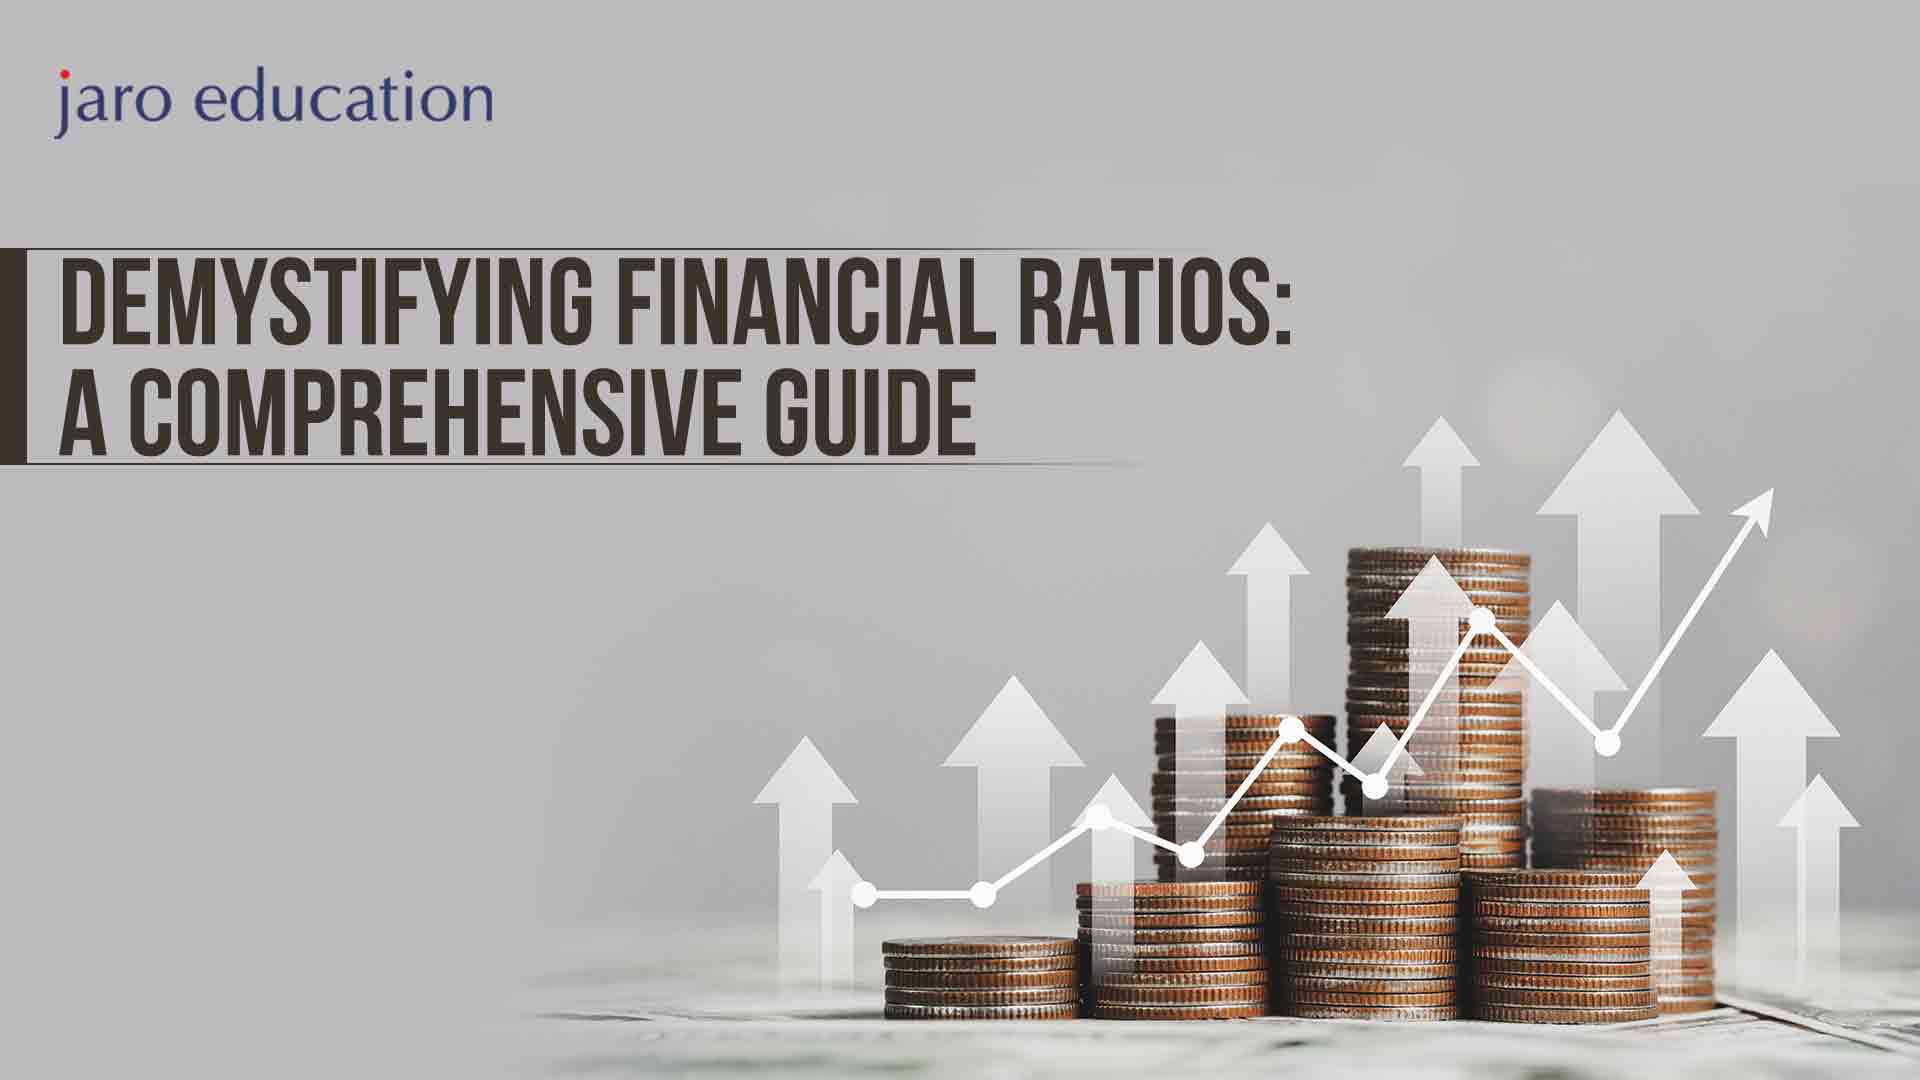 Demystifying-Financial-Ratios-A-Comprehensive-Guide